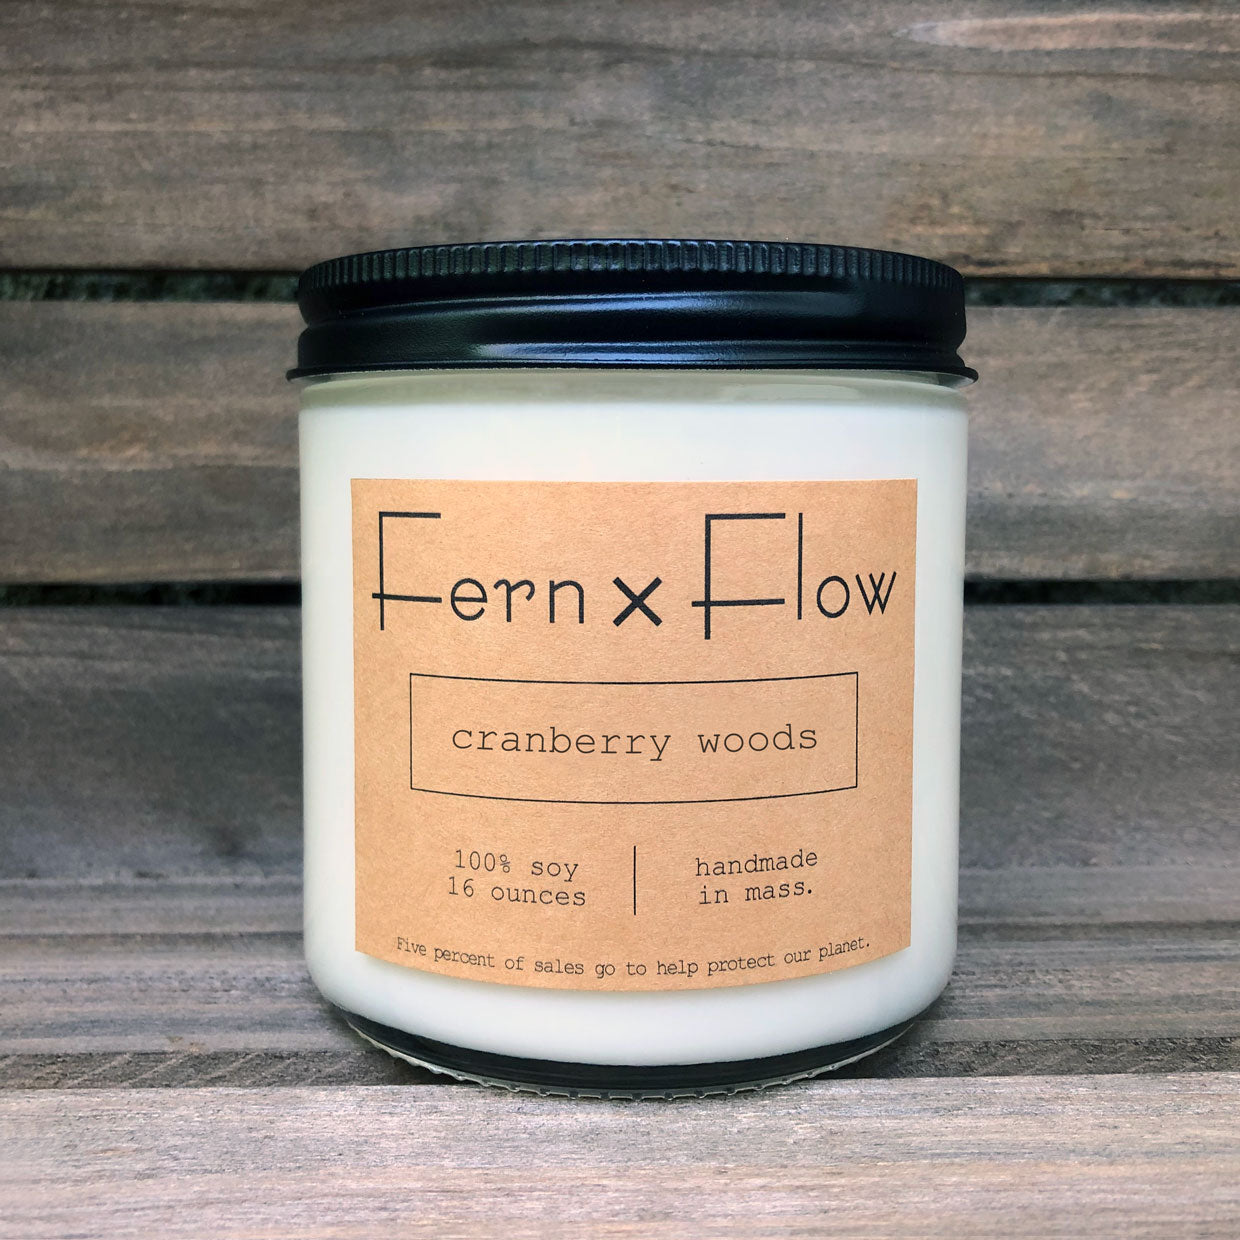 Sixteen-ounce Fern x Flow Cranberry Woods scented soy candle against a weathered, wooden crate.